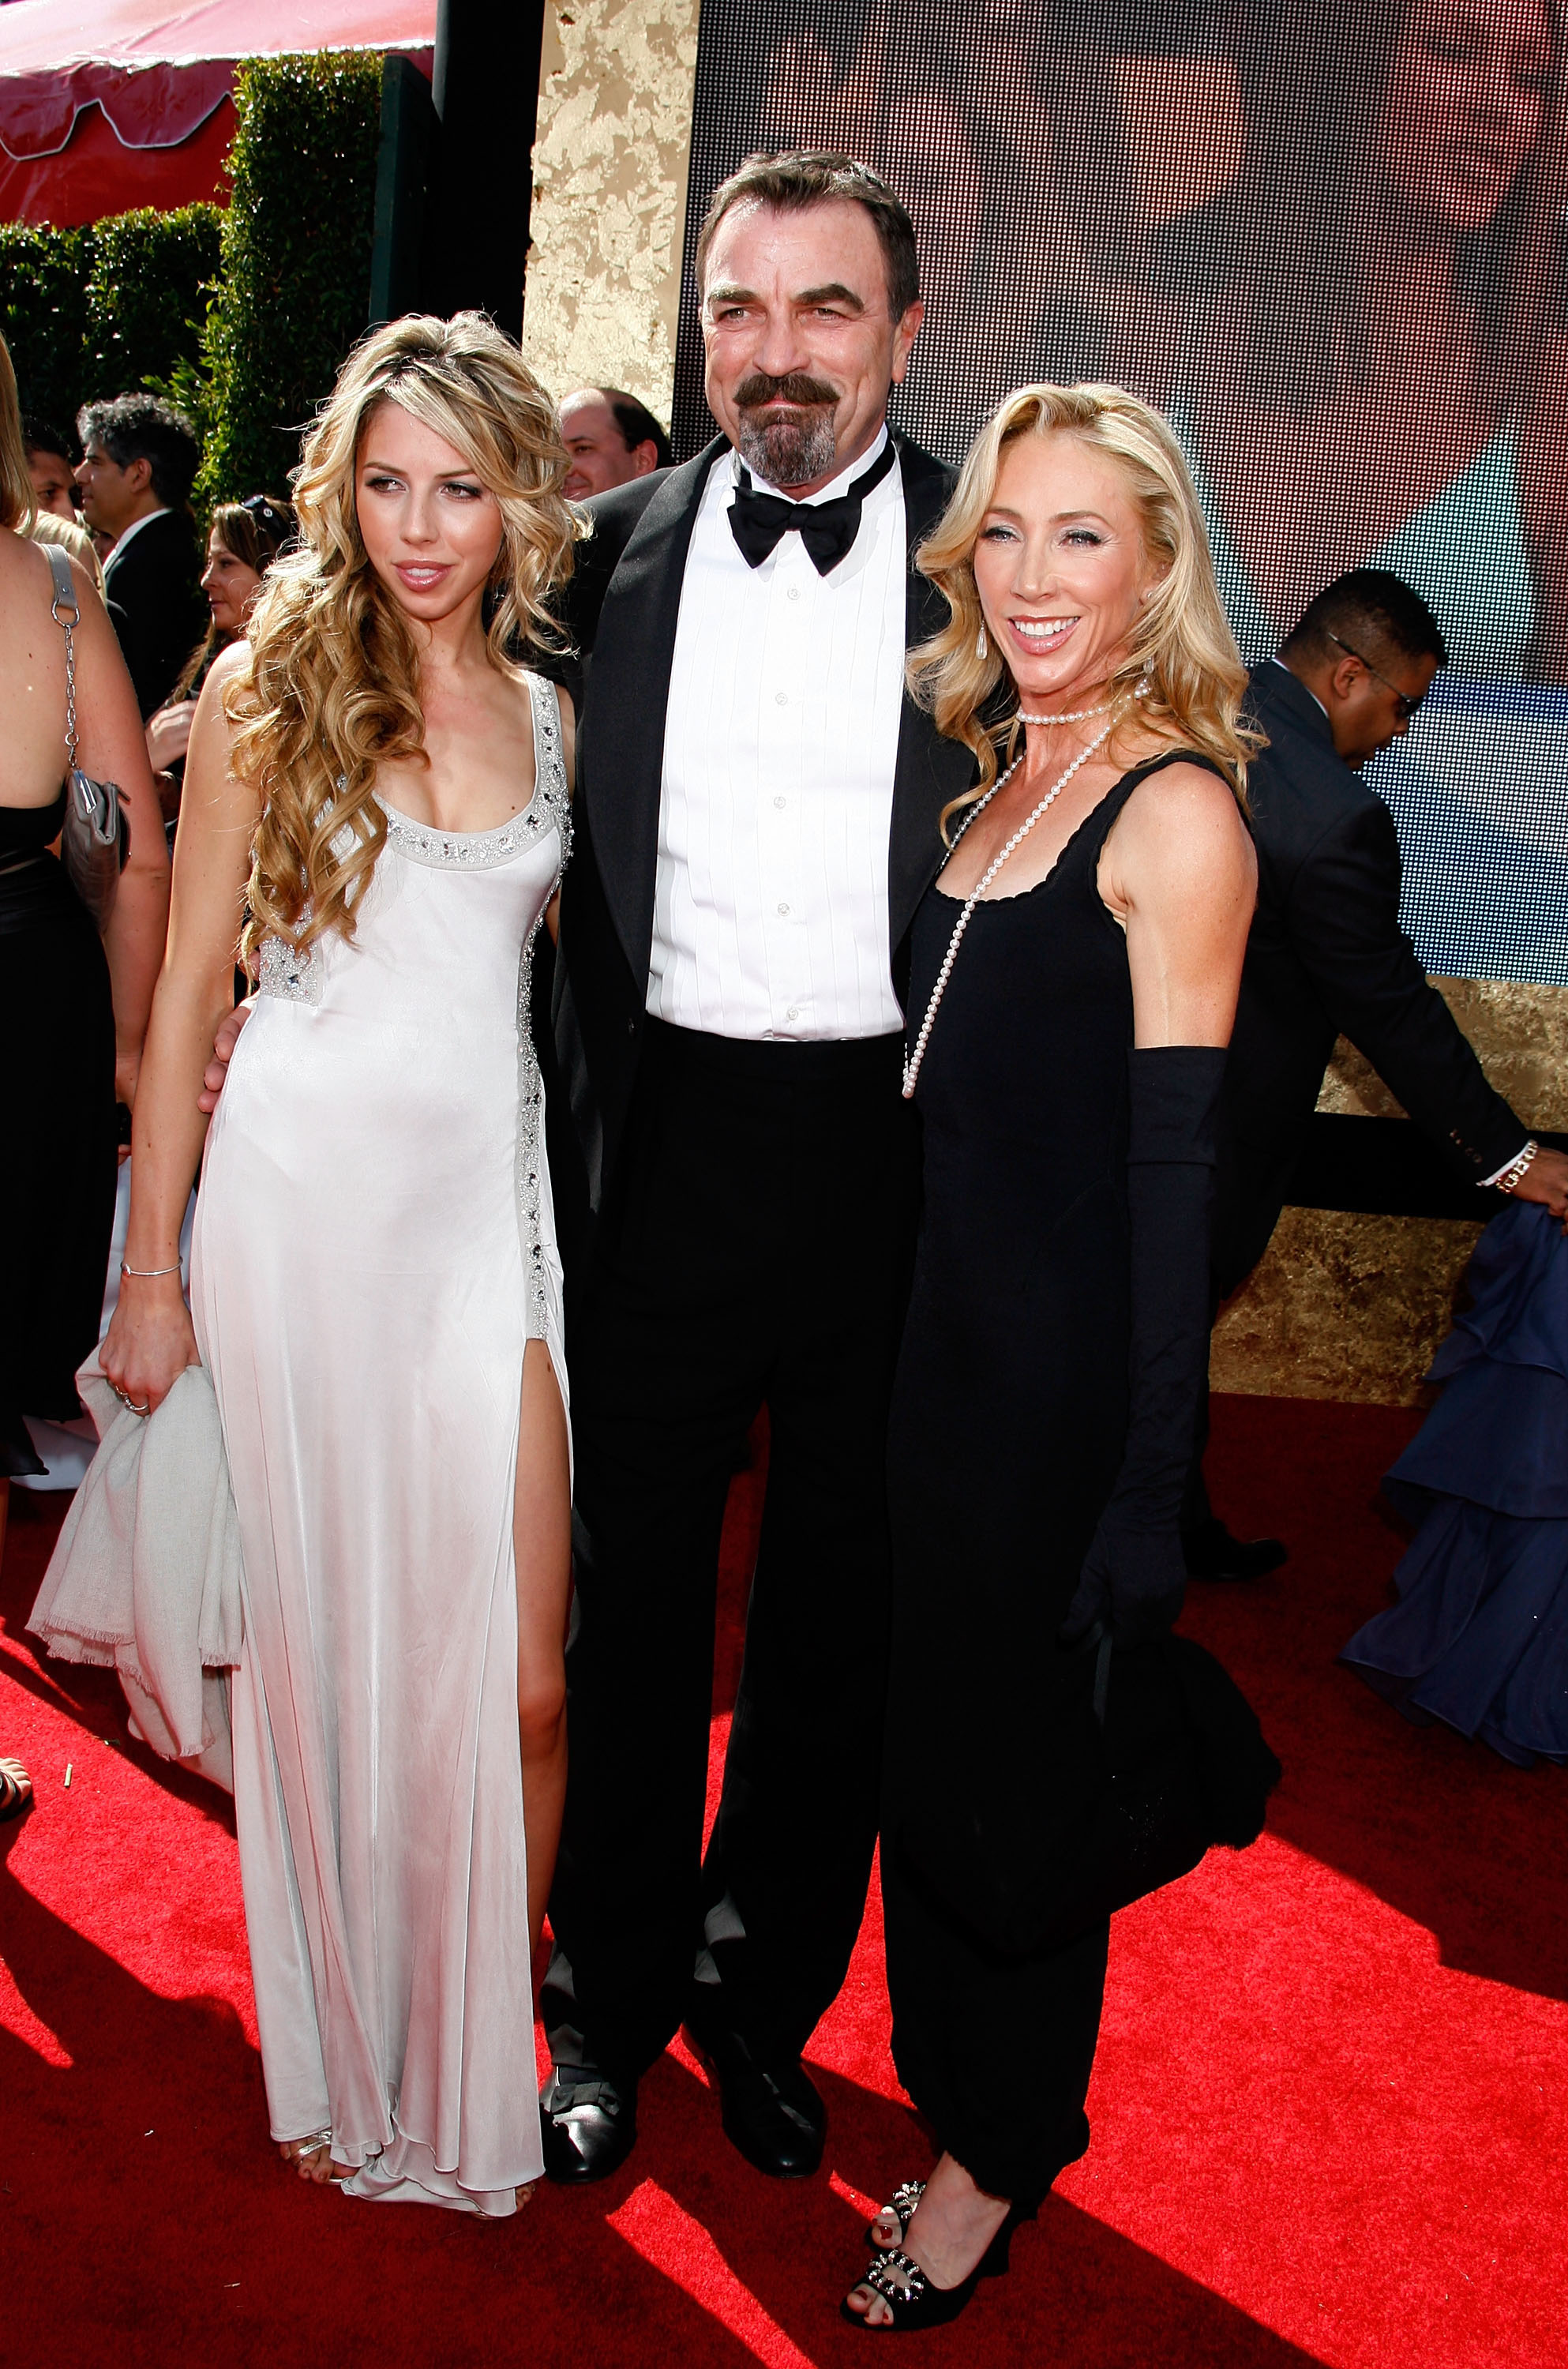 Hannah and Tom Selleck with Jillie Joan Mack at the the 59th Primetime Emmy Awards in 2007 | Source: Getty Images